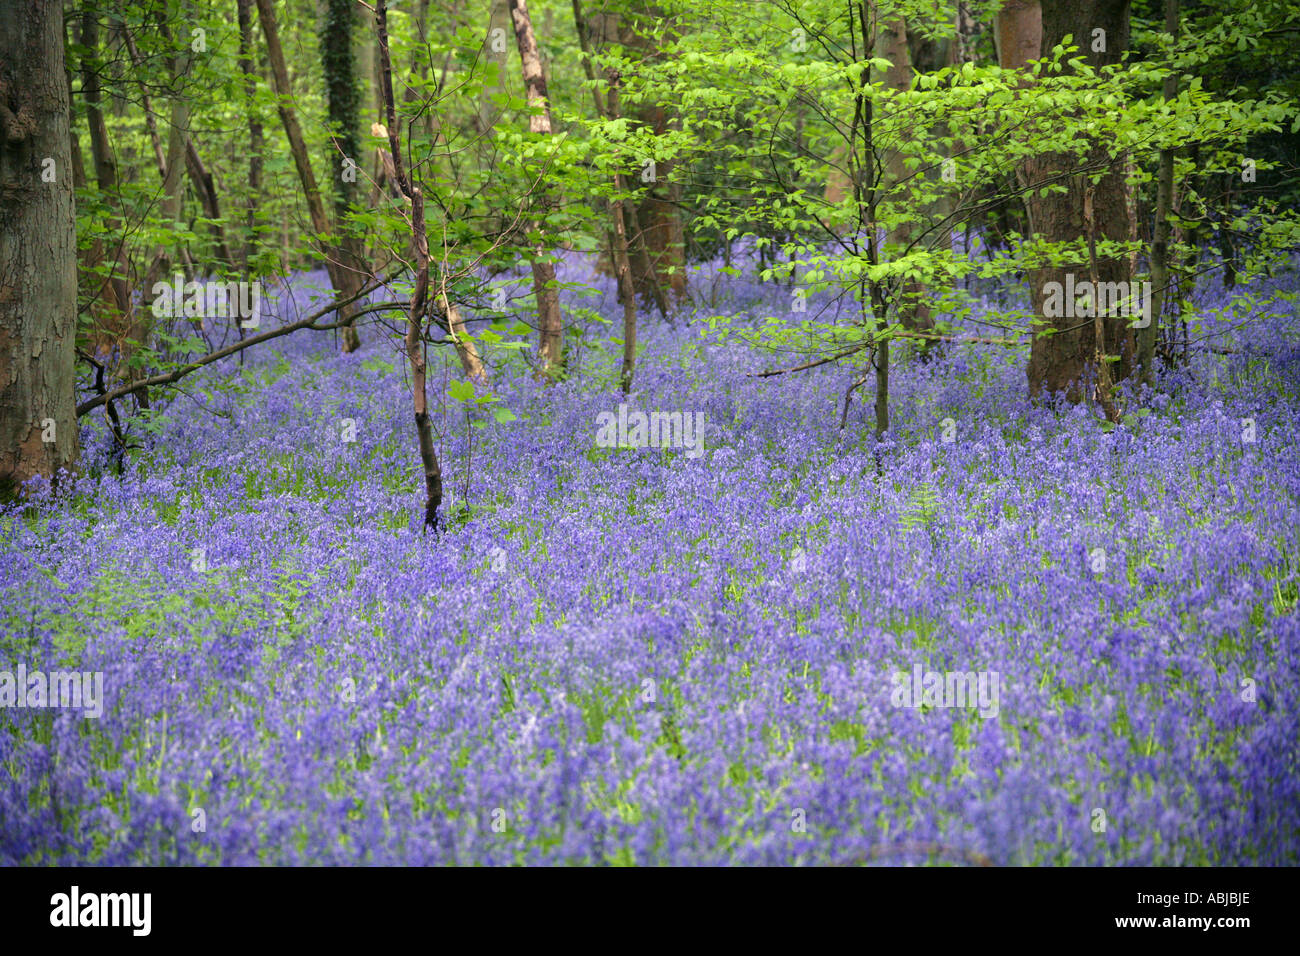 Bluebells, Hyacinthoides non-scripta (syn. Endymion non-scriptum, Scilla non-scripta), Hyacinthaceae, Whippendell Woods, Watford Banque D'Images